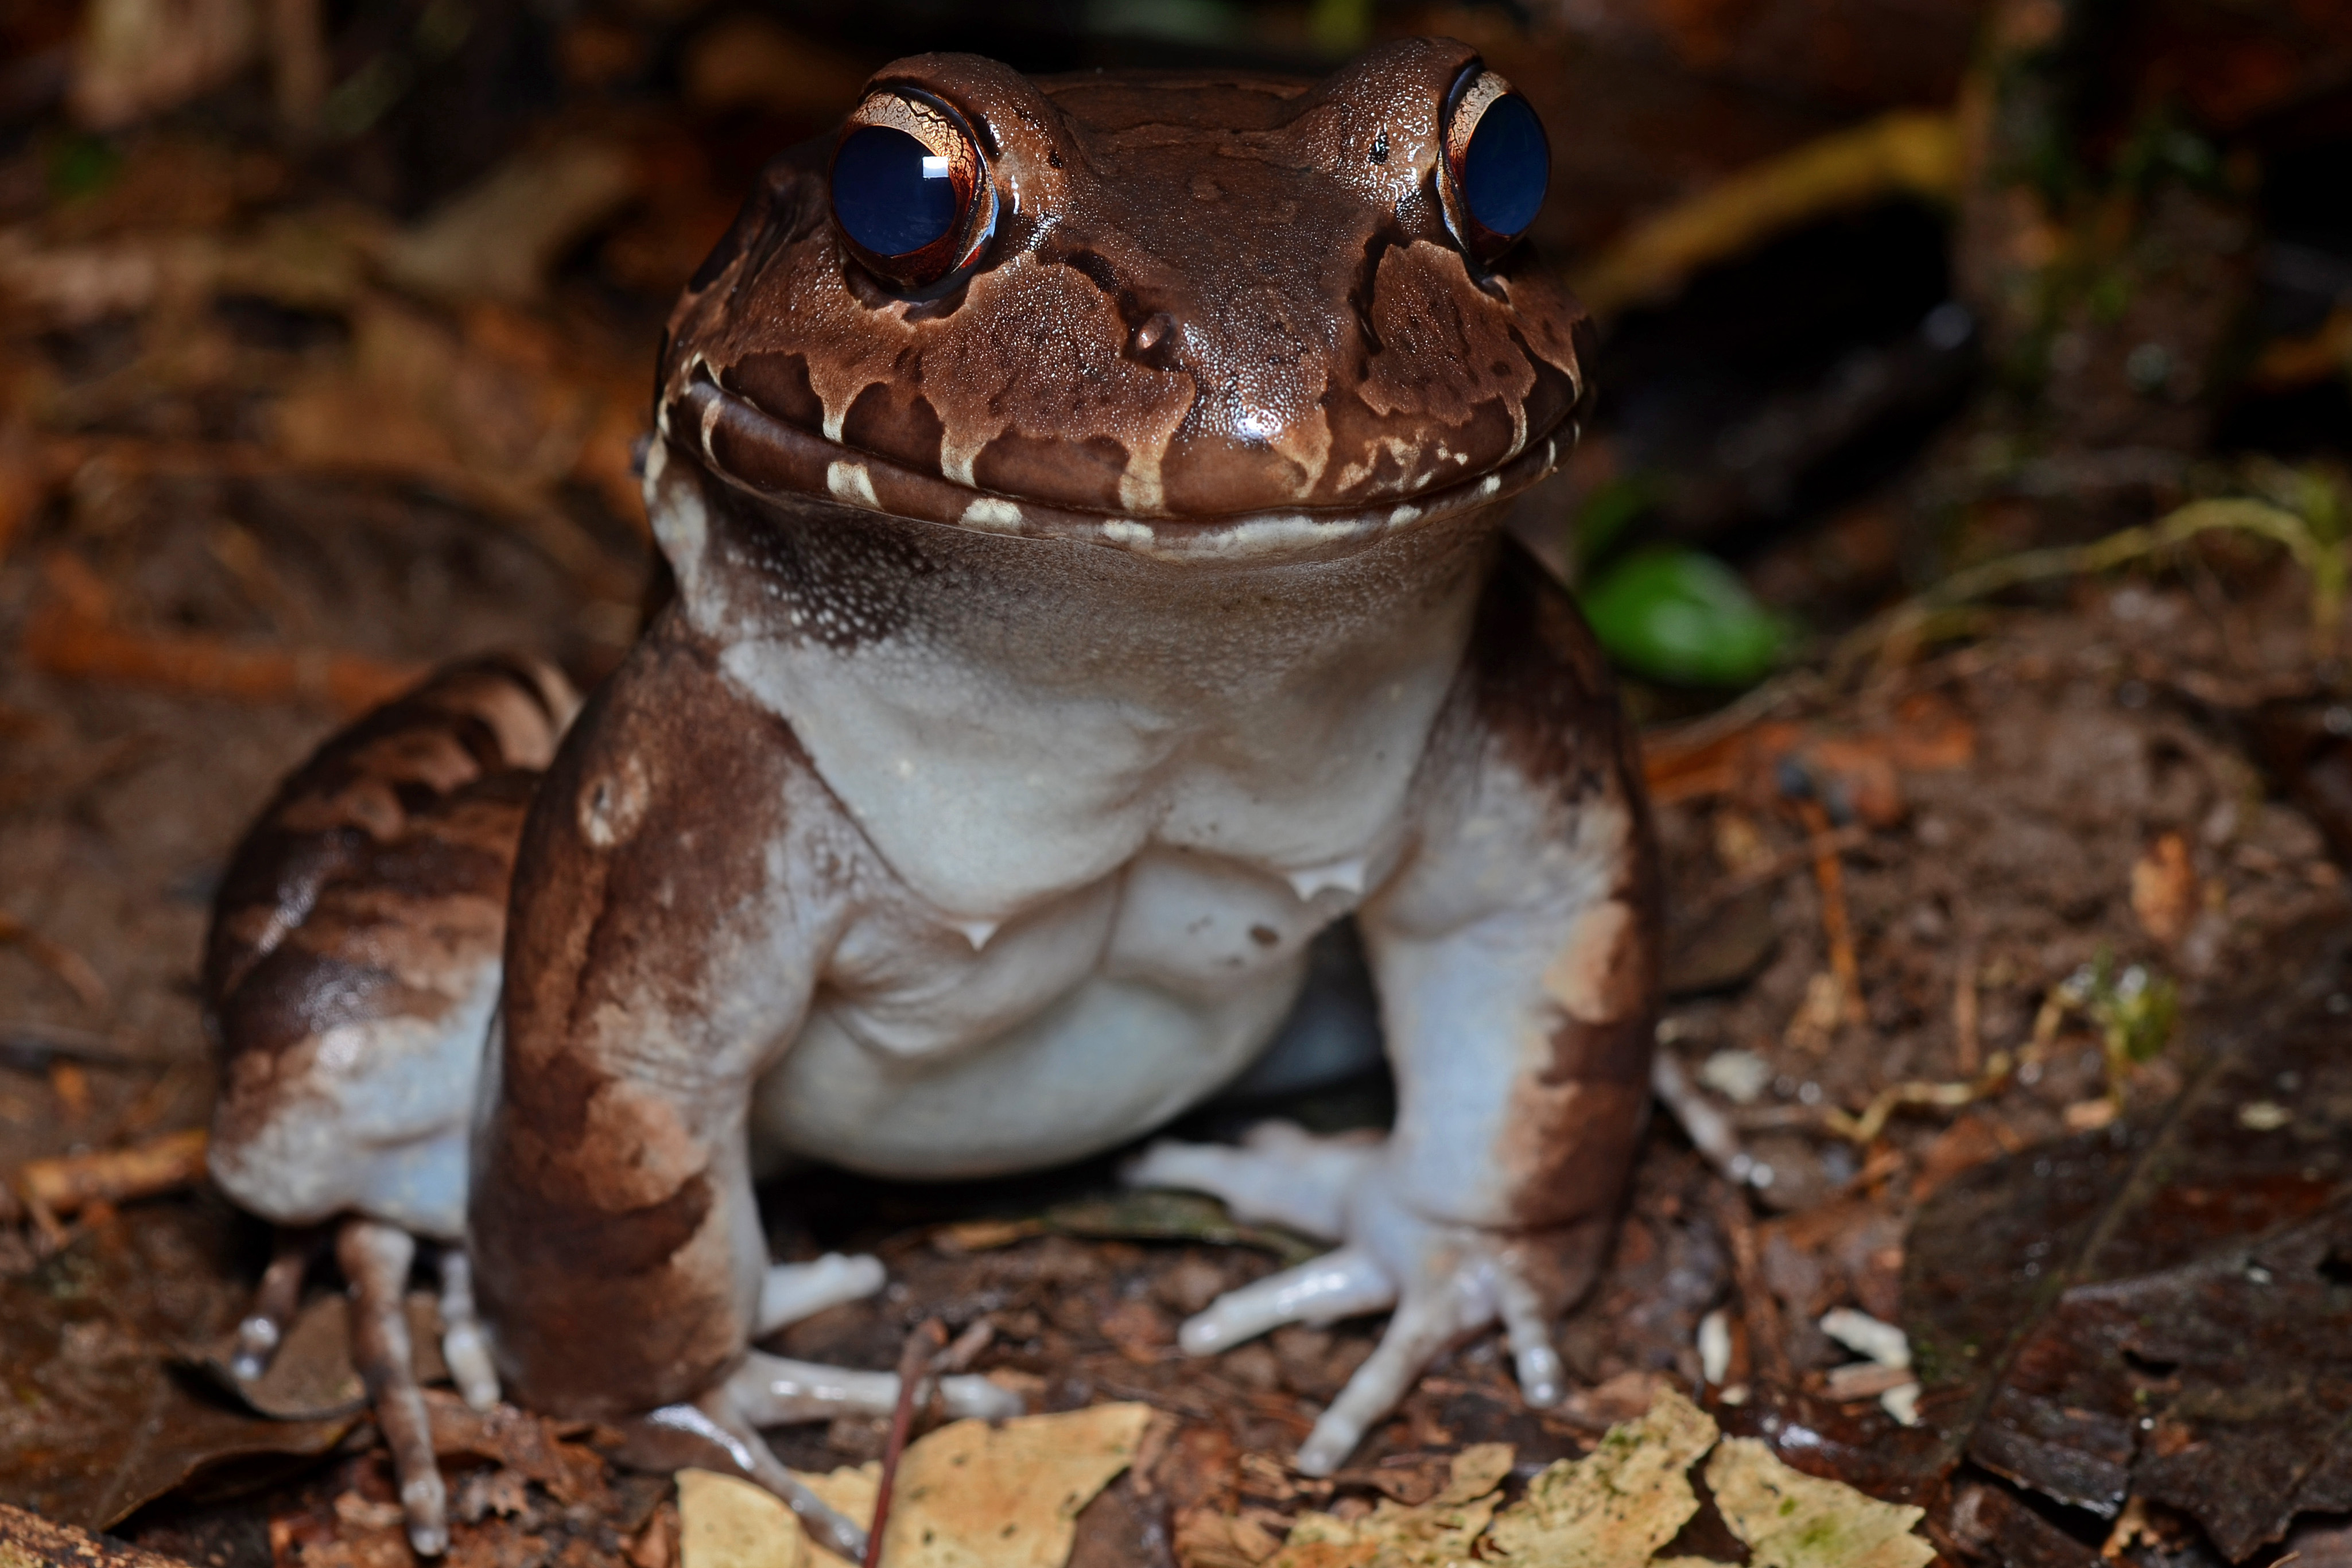 File:Flickr - ggallice - Smoky jungle frog.jpg - Wikimedia Commons